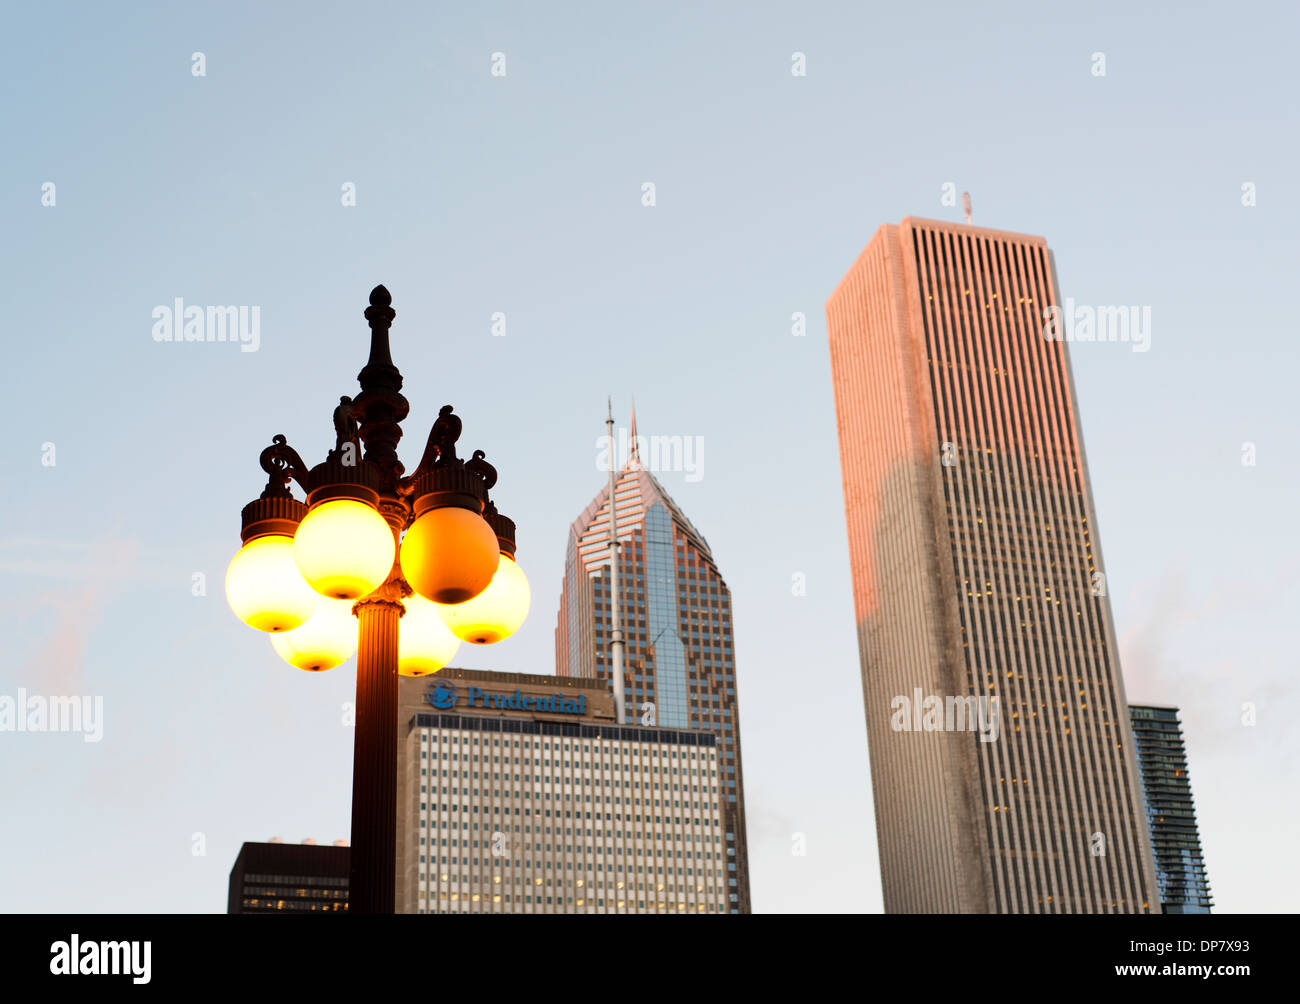 Illuminated old style street light with modern buildings beyond. Stock Photo